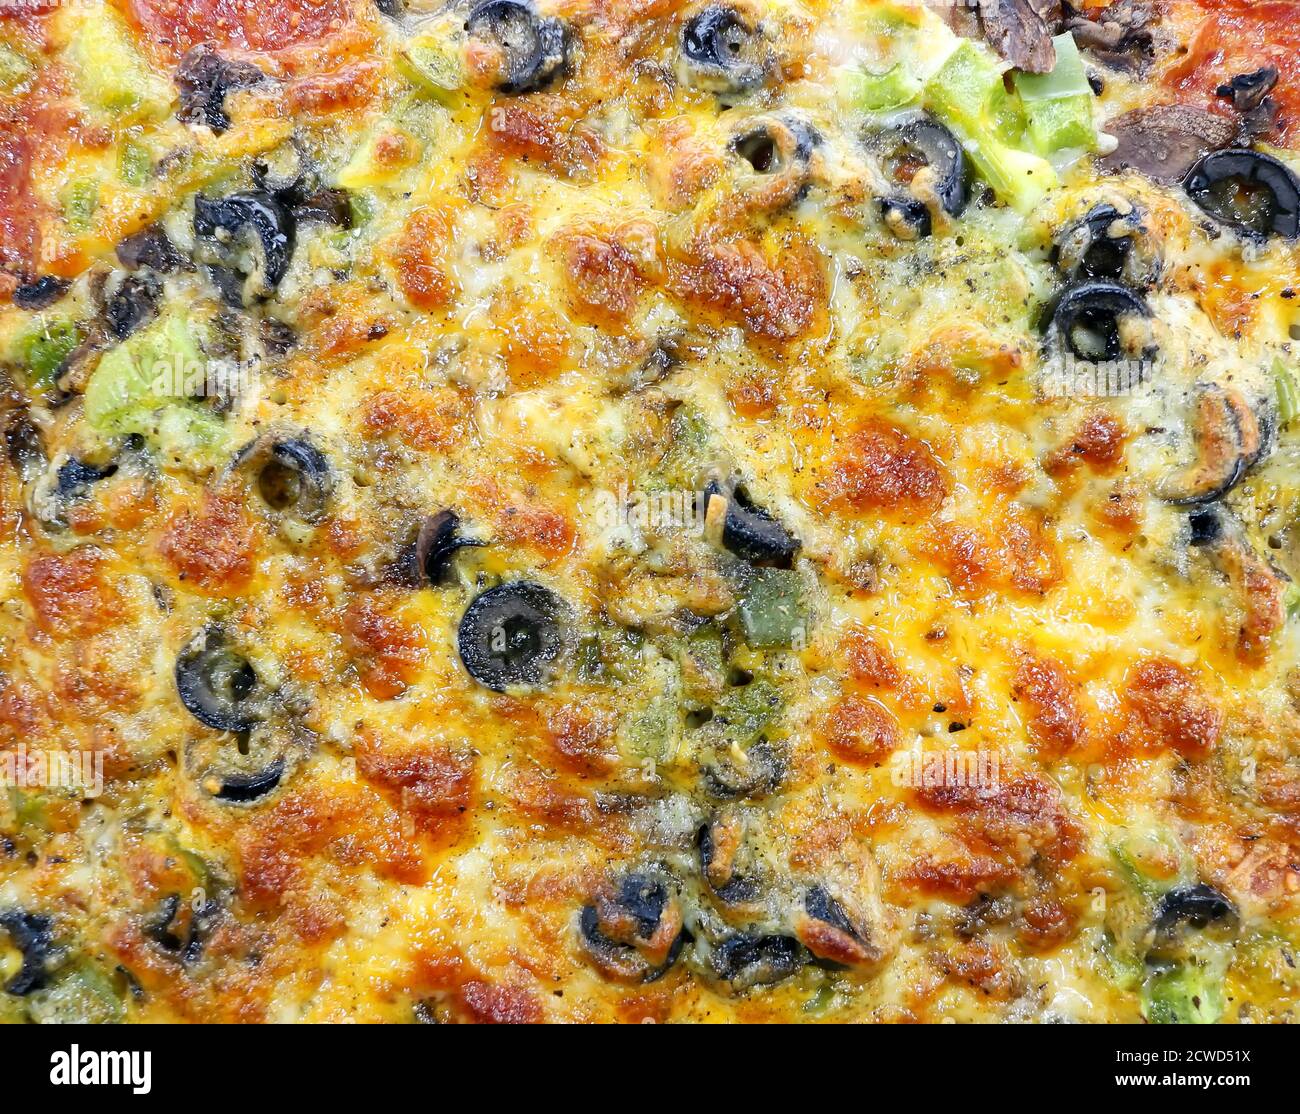 Close up photo of a pizza, topped with, baked cheese, olives, green pepper, sauce,  and pepperoni. Stock Photo